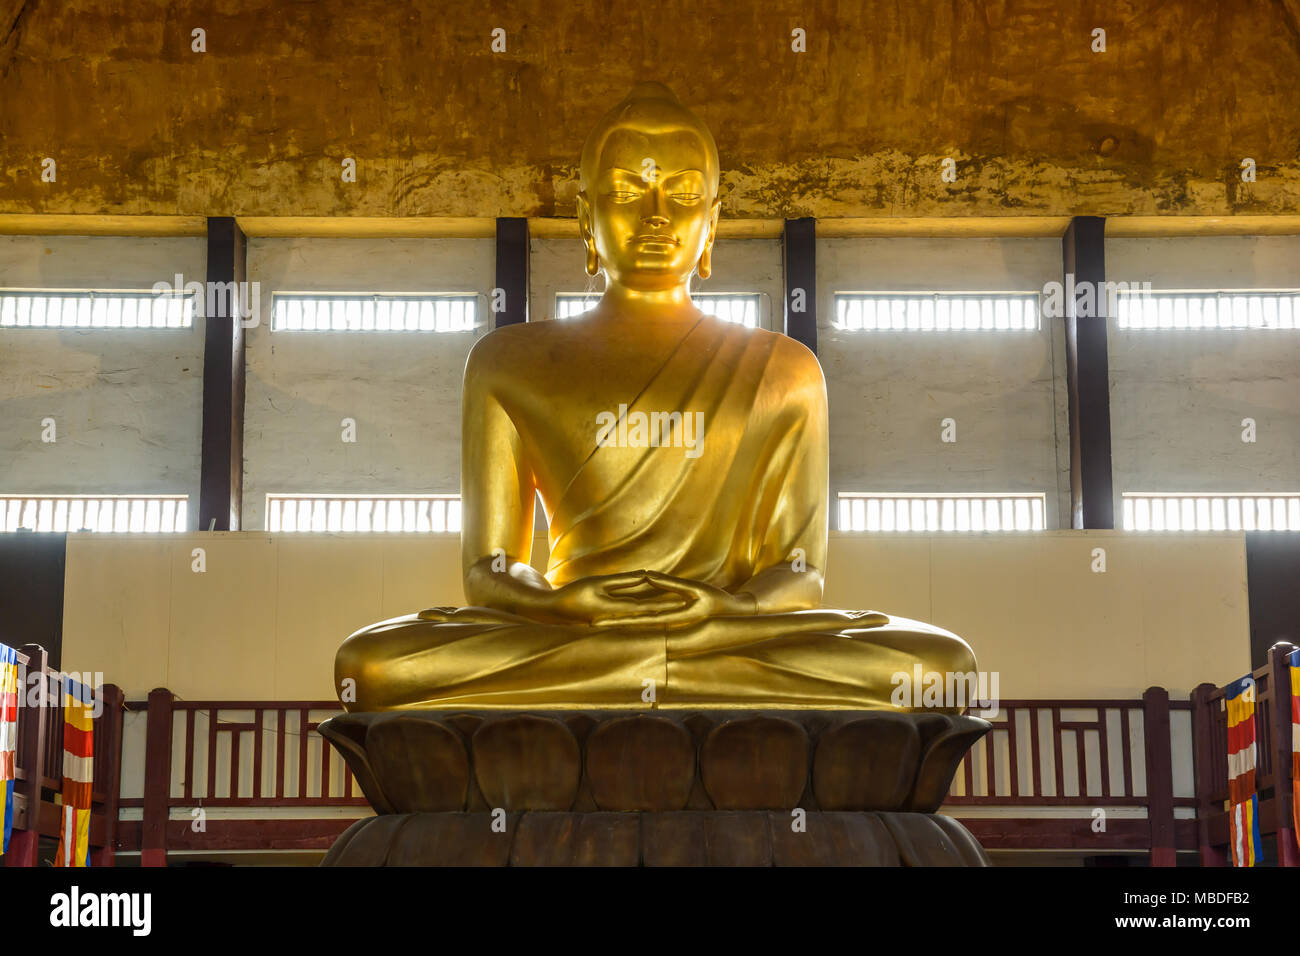 The 10 meters tall golden statue of Buddha in a Lotus pose, seated in the Great Pagoda of the Bois de Vincennes, is the tallest in Europe. Stock Photo